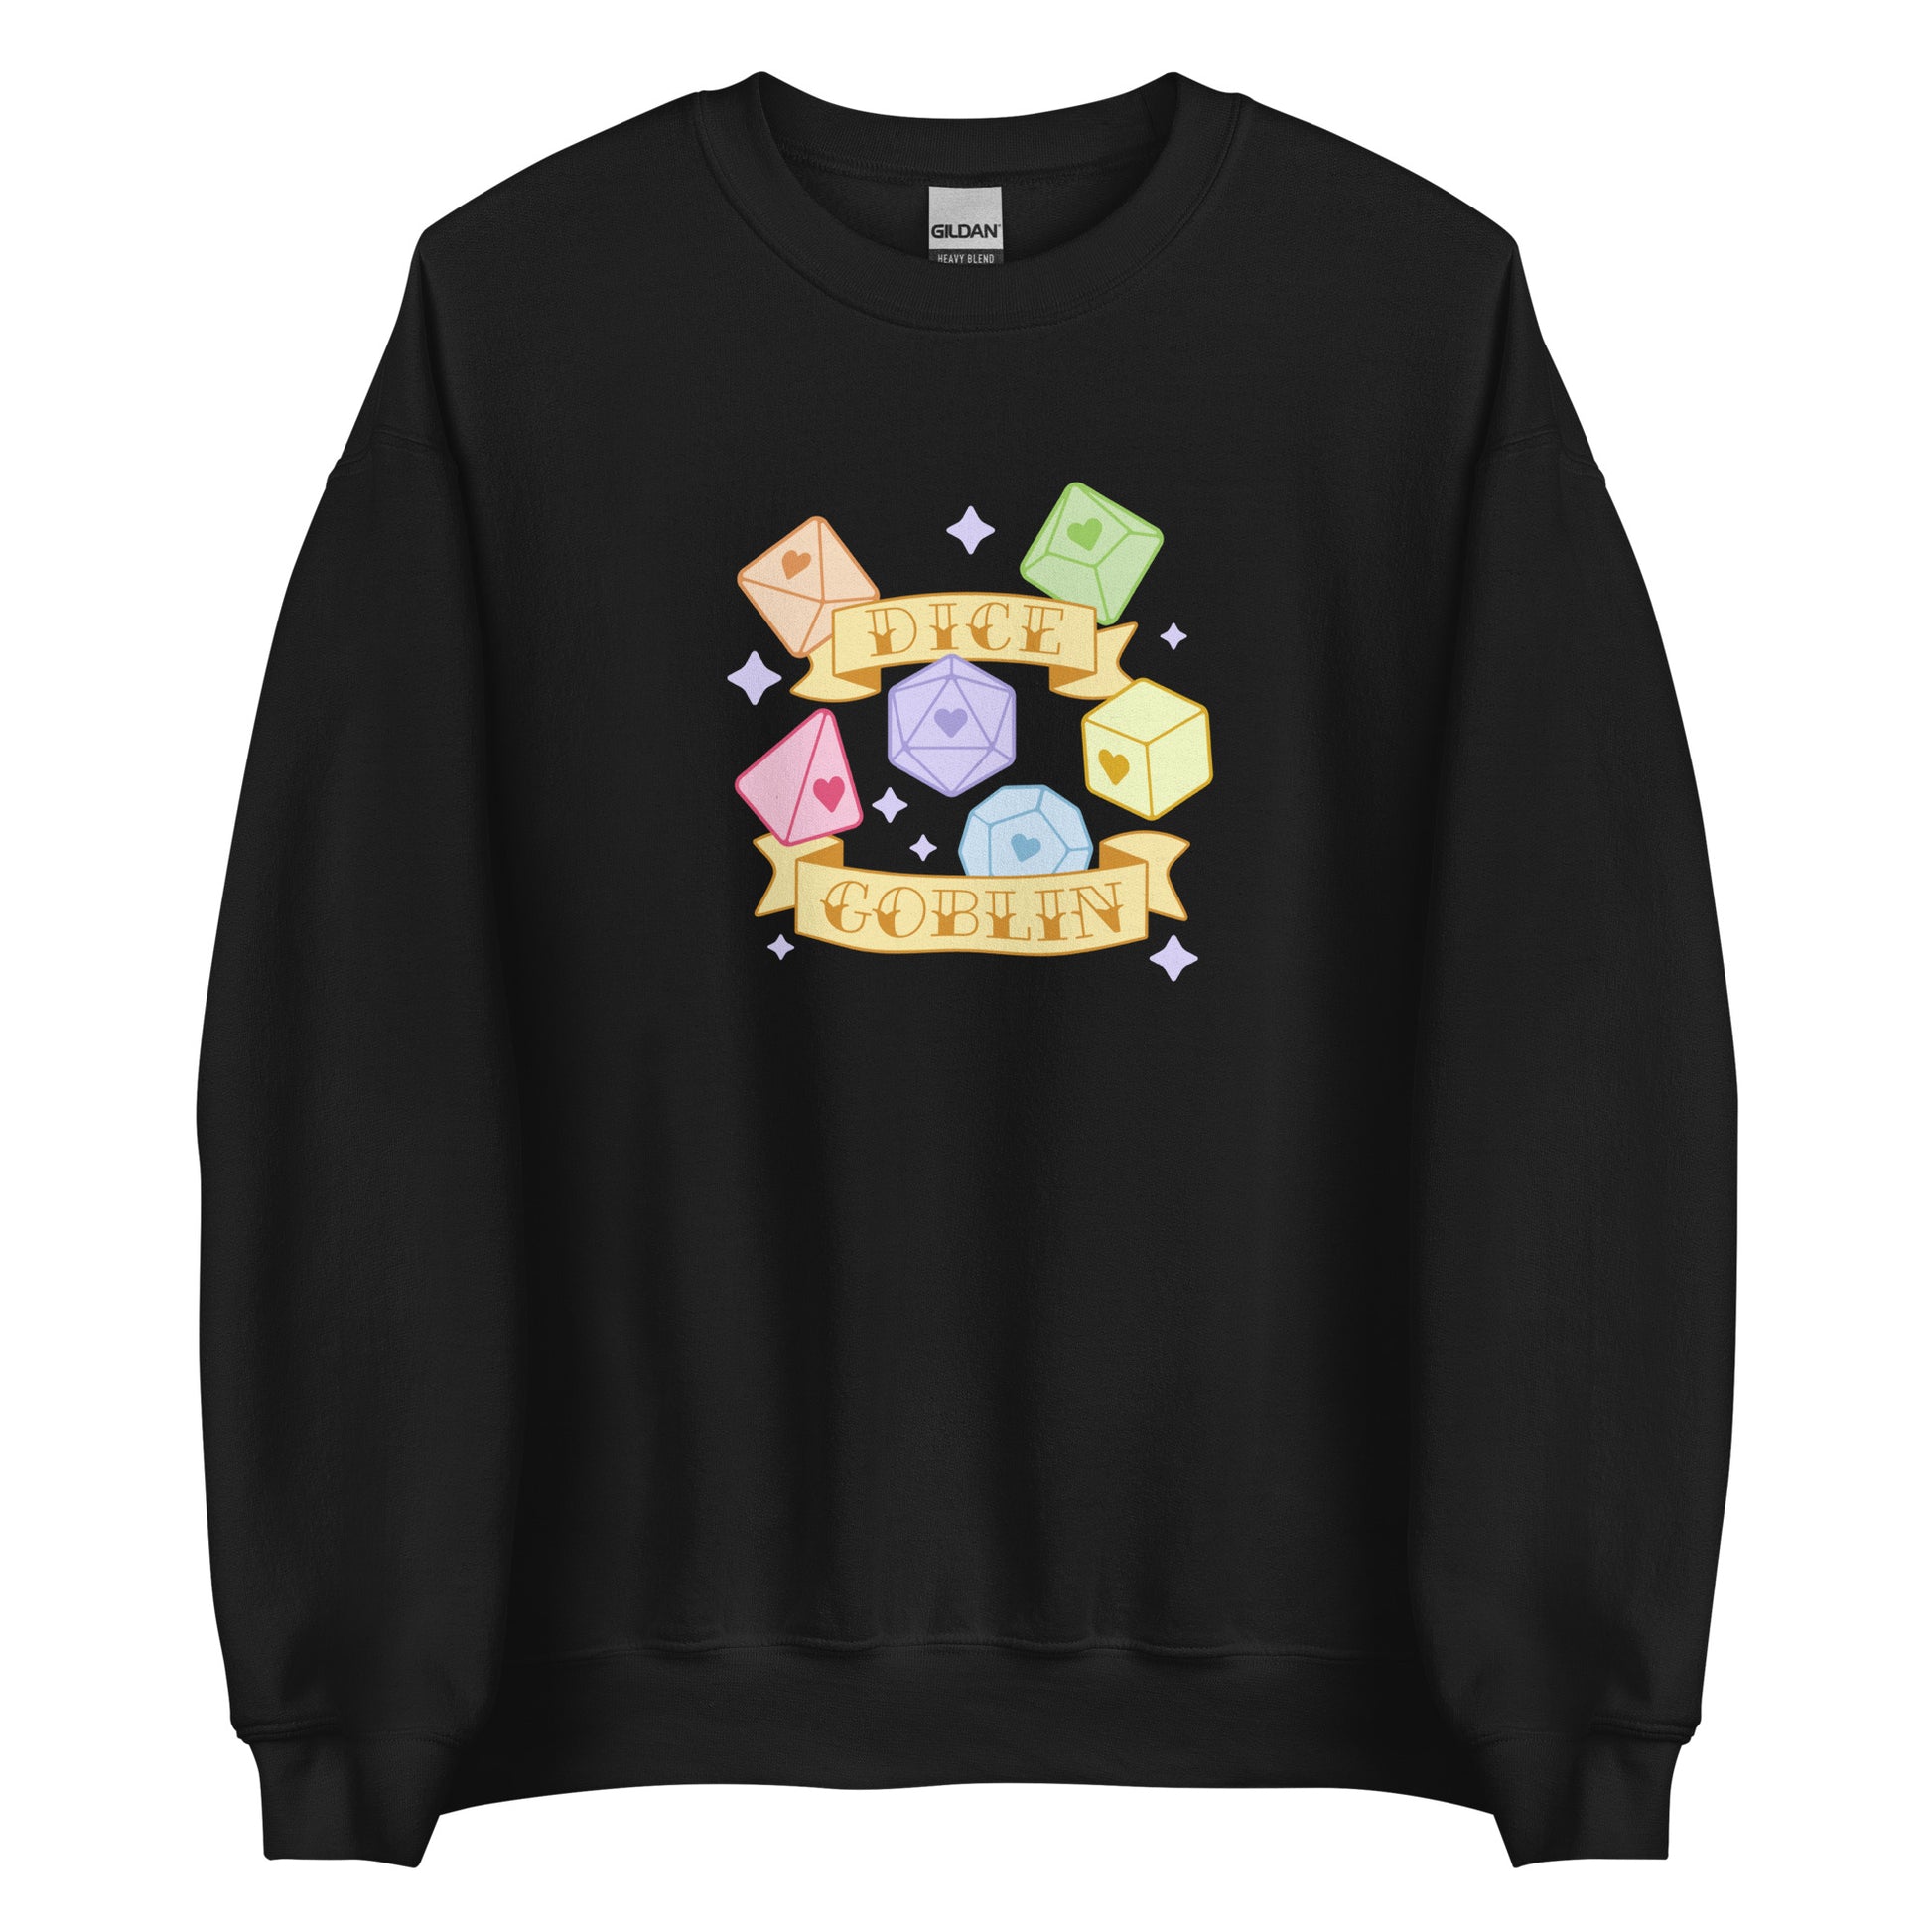 A black crewneck sweatshirt featuring an image of six polyhedral dice in pastel rainbow colors. Two banners surround the dice. Text on the banners reads "Dice Goblin"